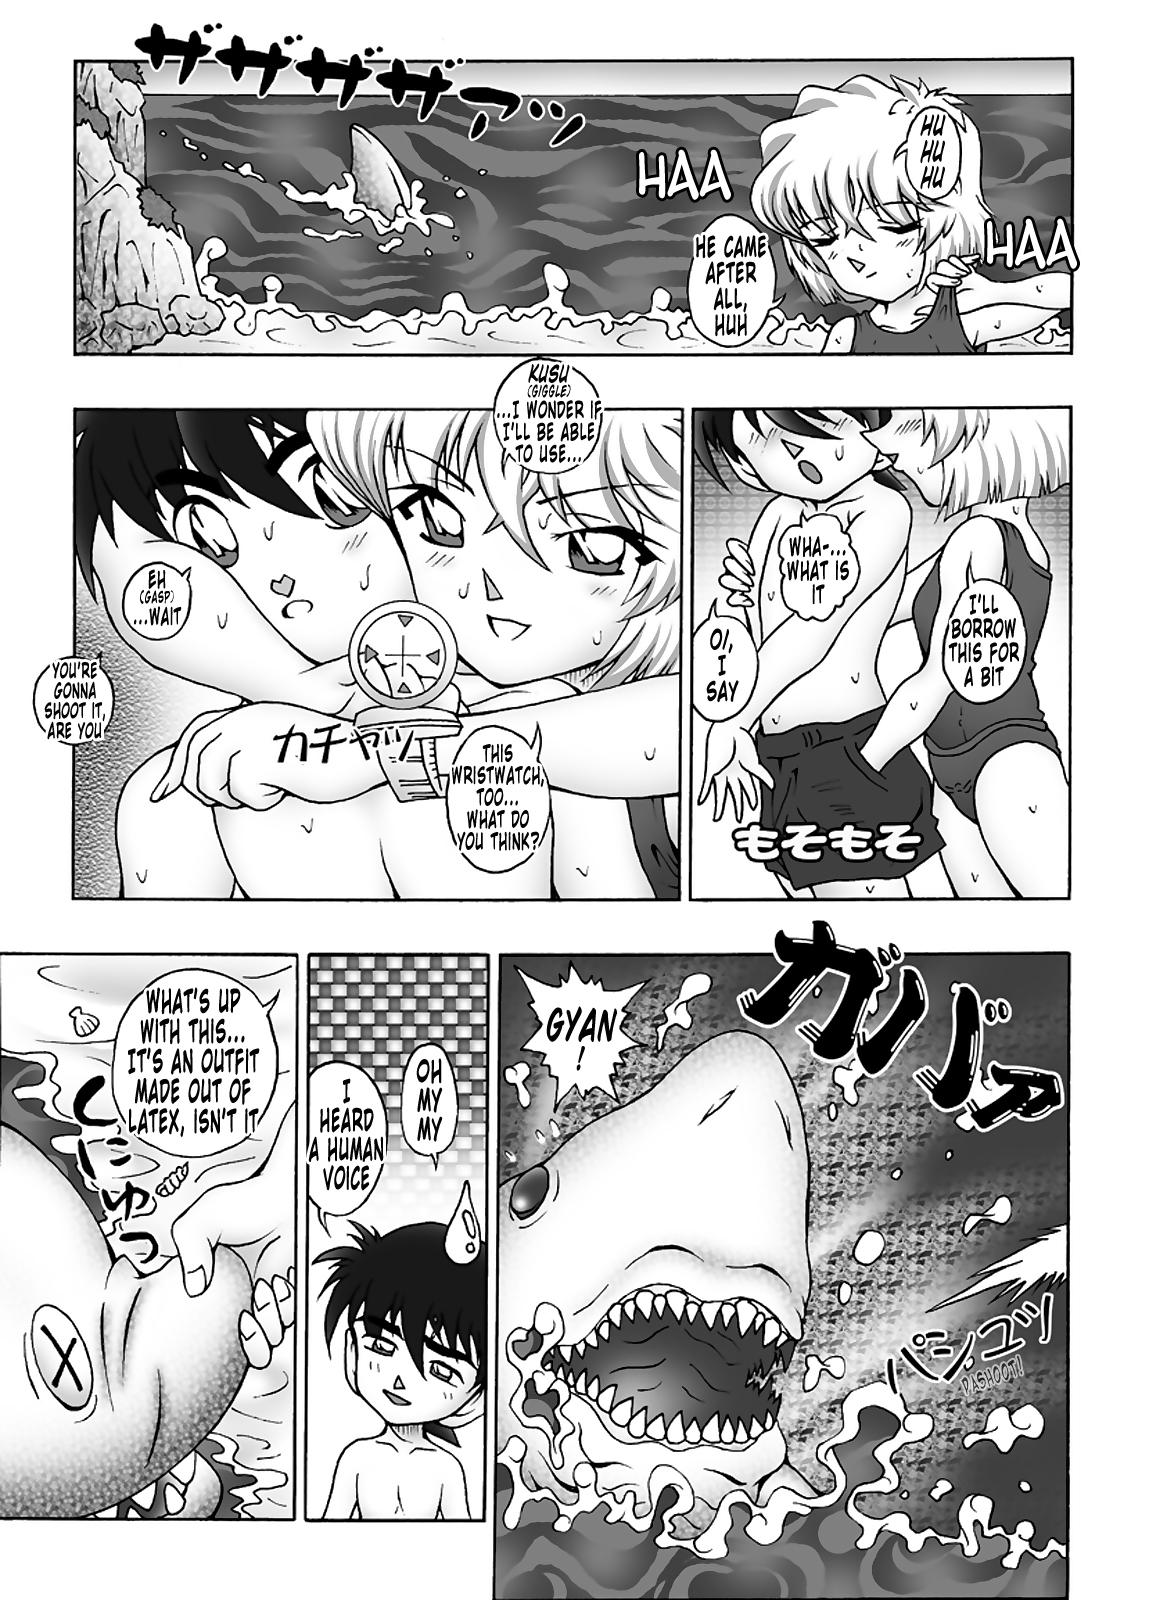 Bumbling Detective Conan - File 9: The Mystery Of The Jaws Crime 17